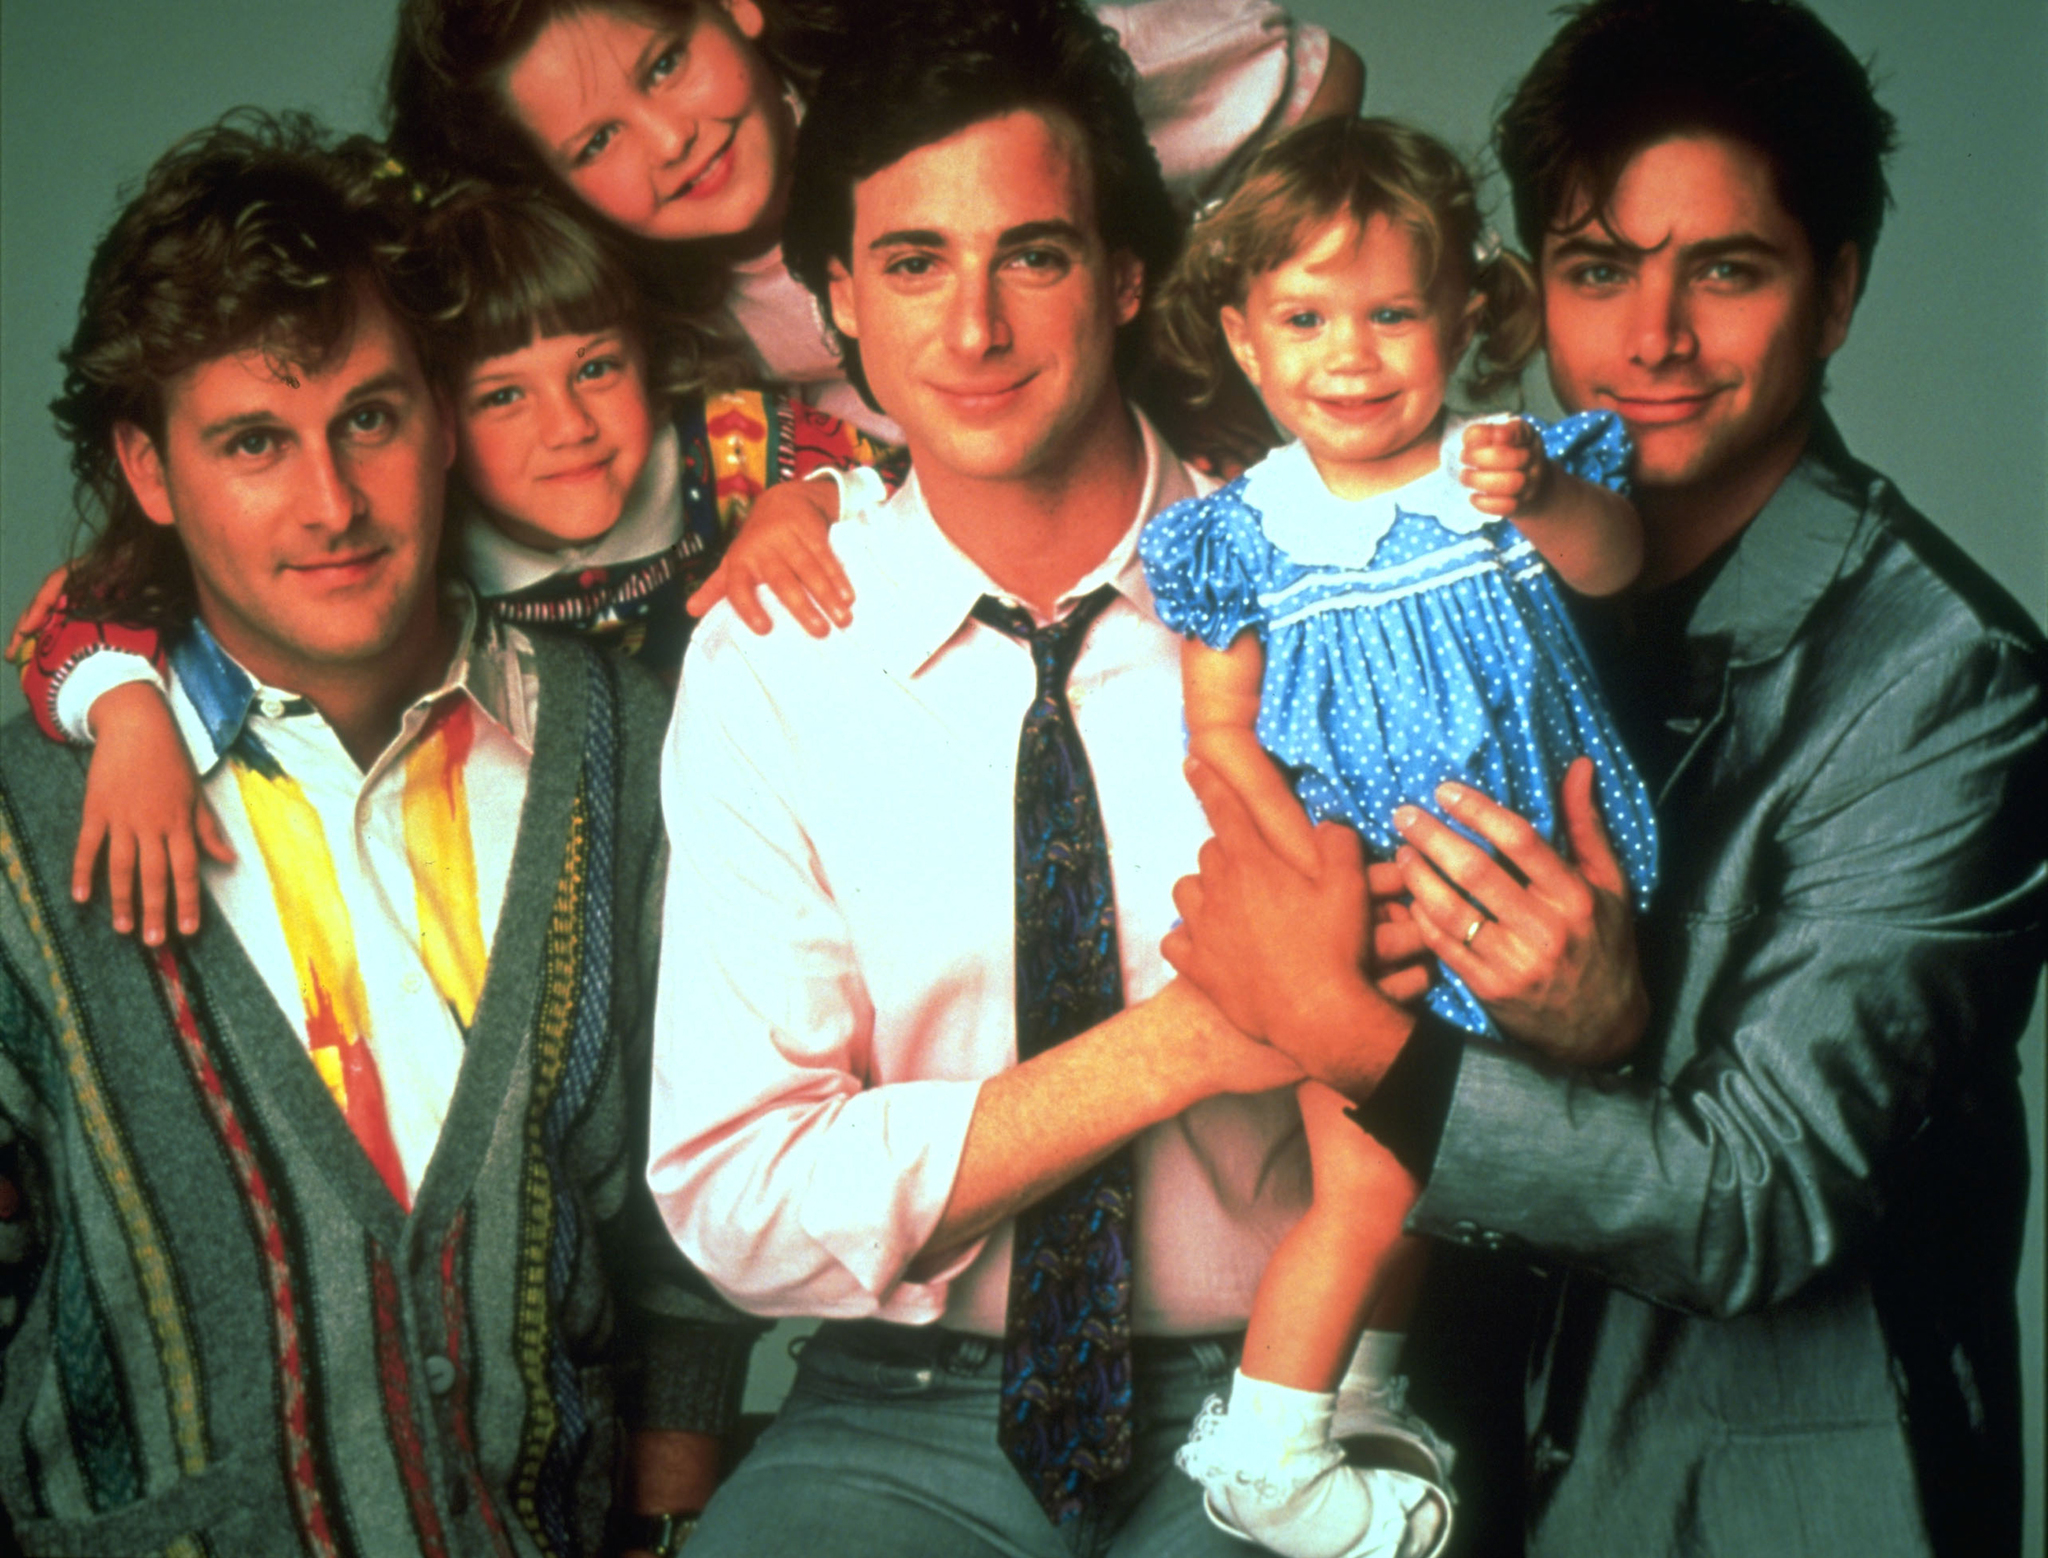 Still of John Stamos, Candace Cameron Bure, Dave Coulier, Bob Saget and Jodie Sweetin in Full House (1987)